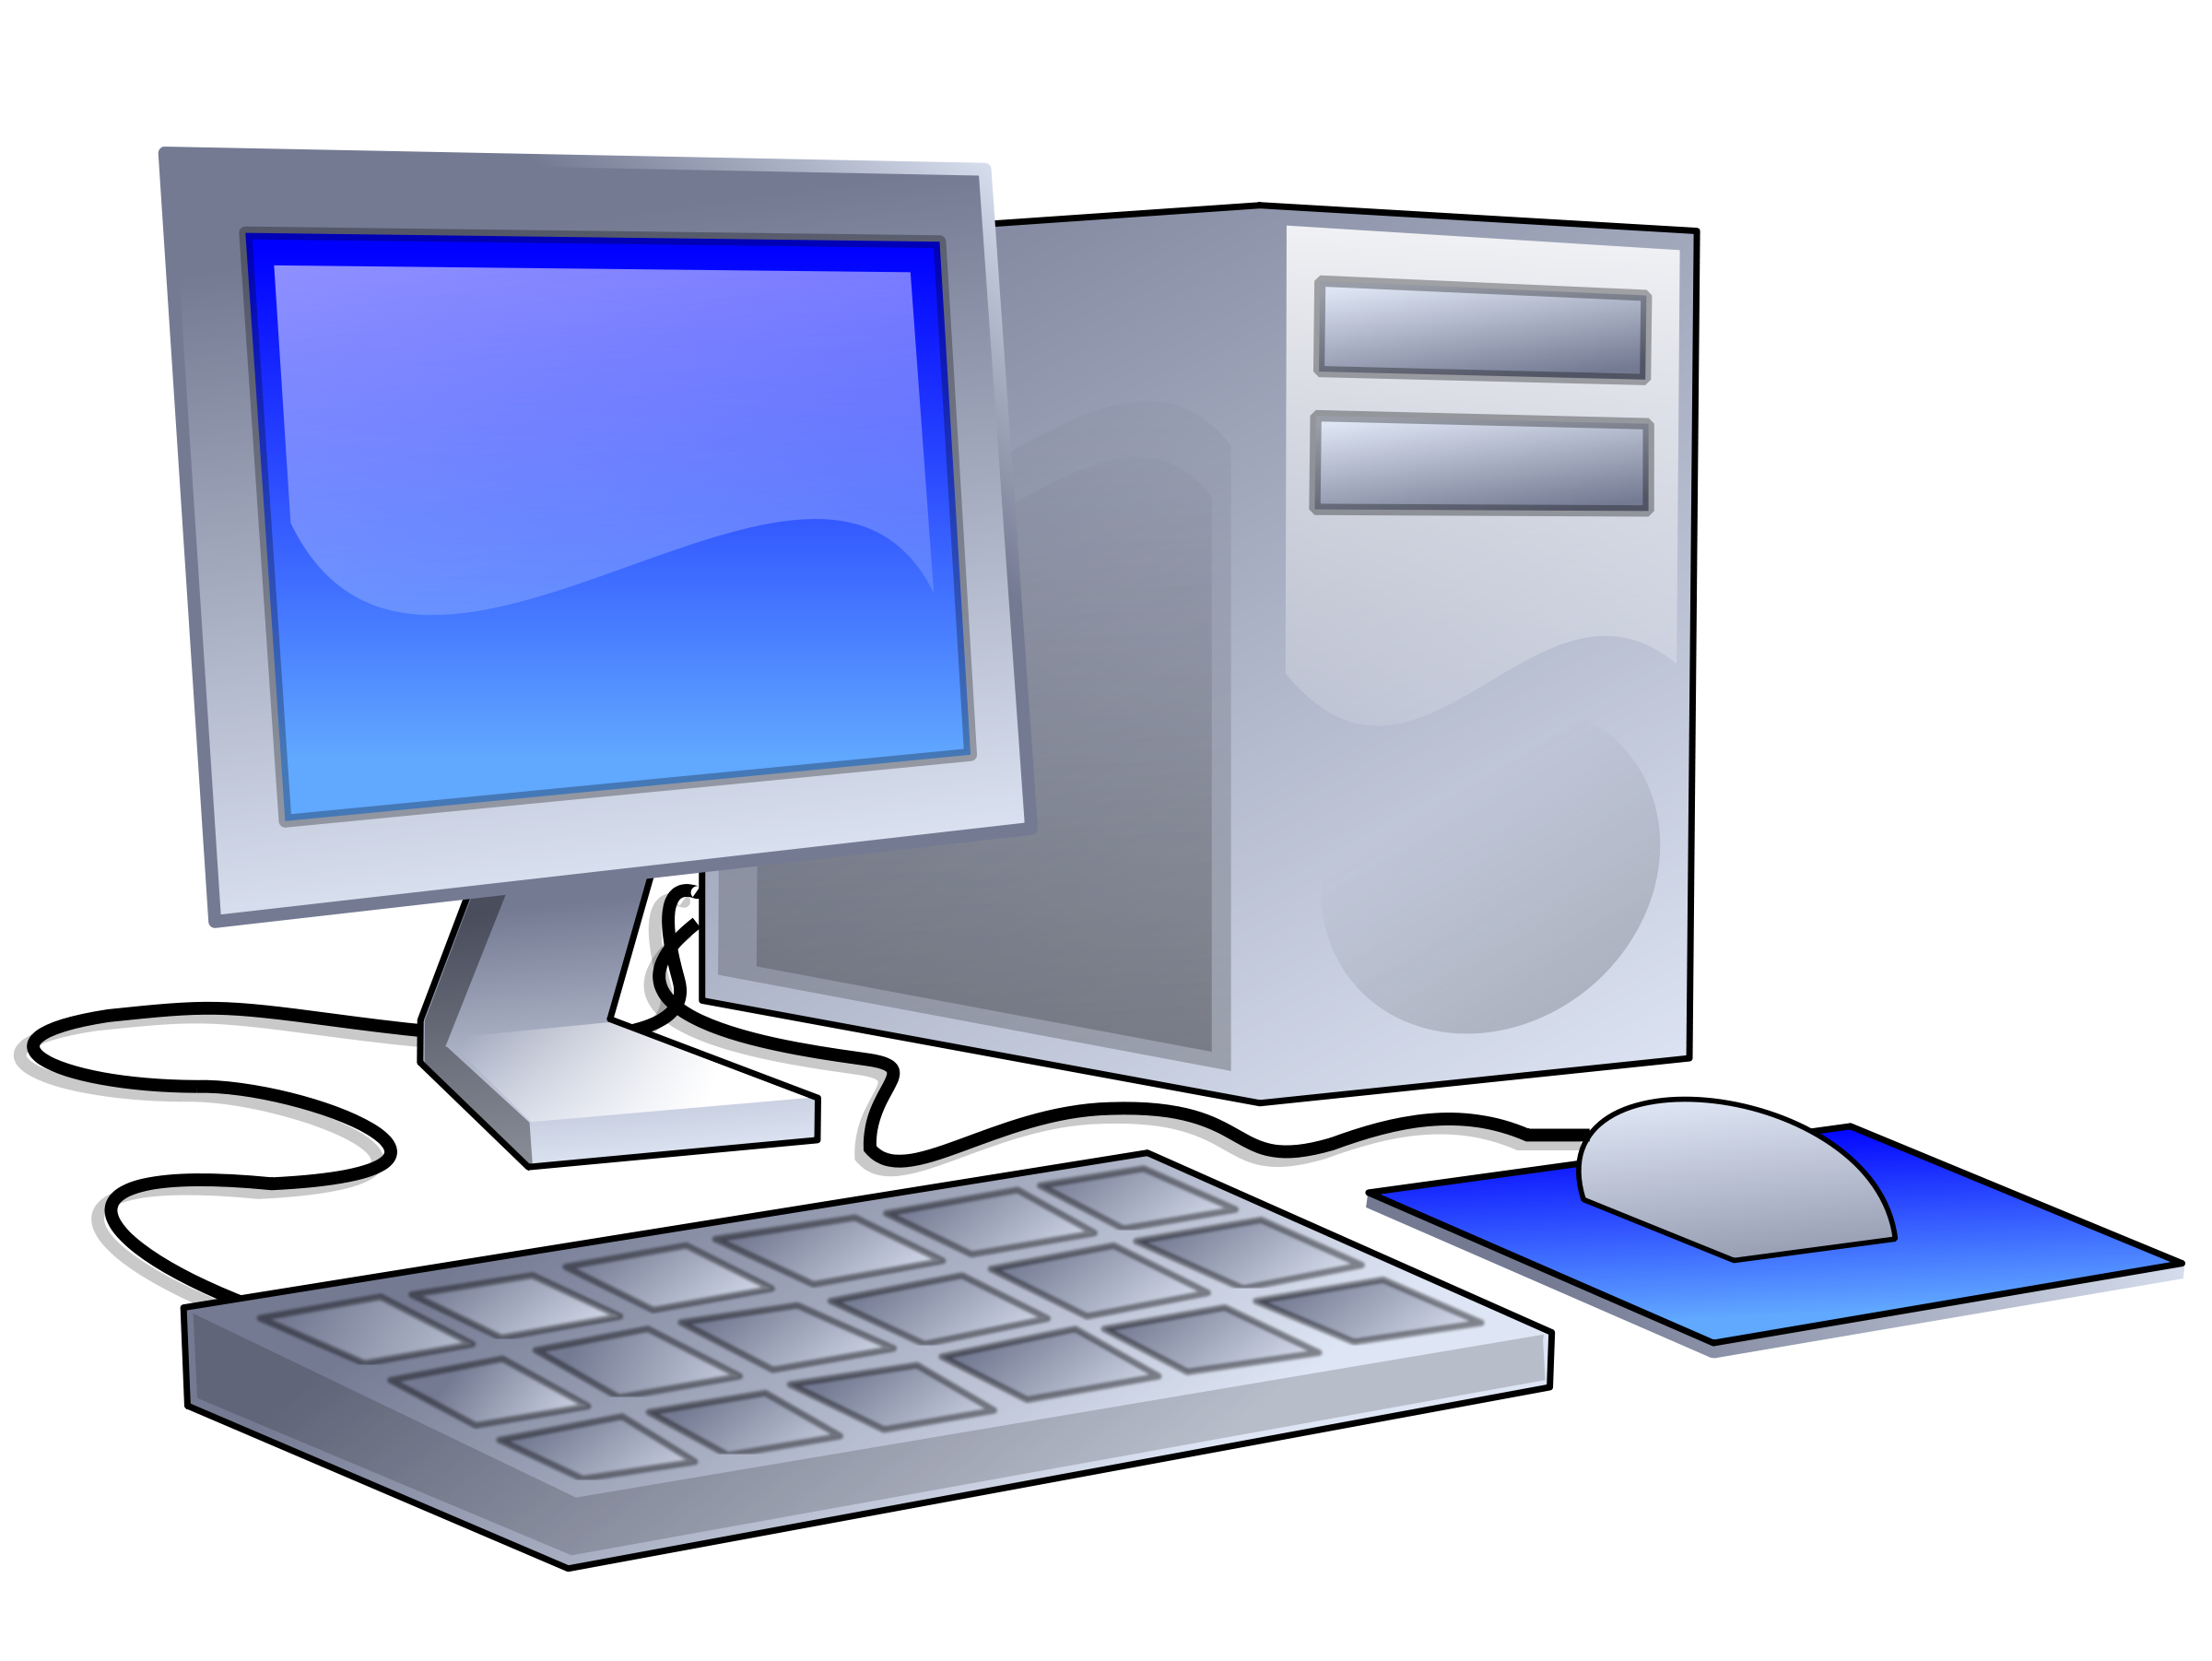 computer technology clipart free - photo #28